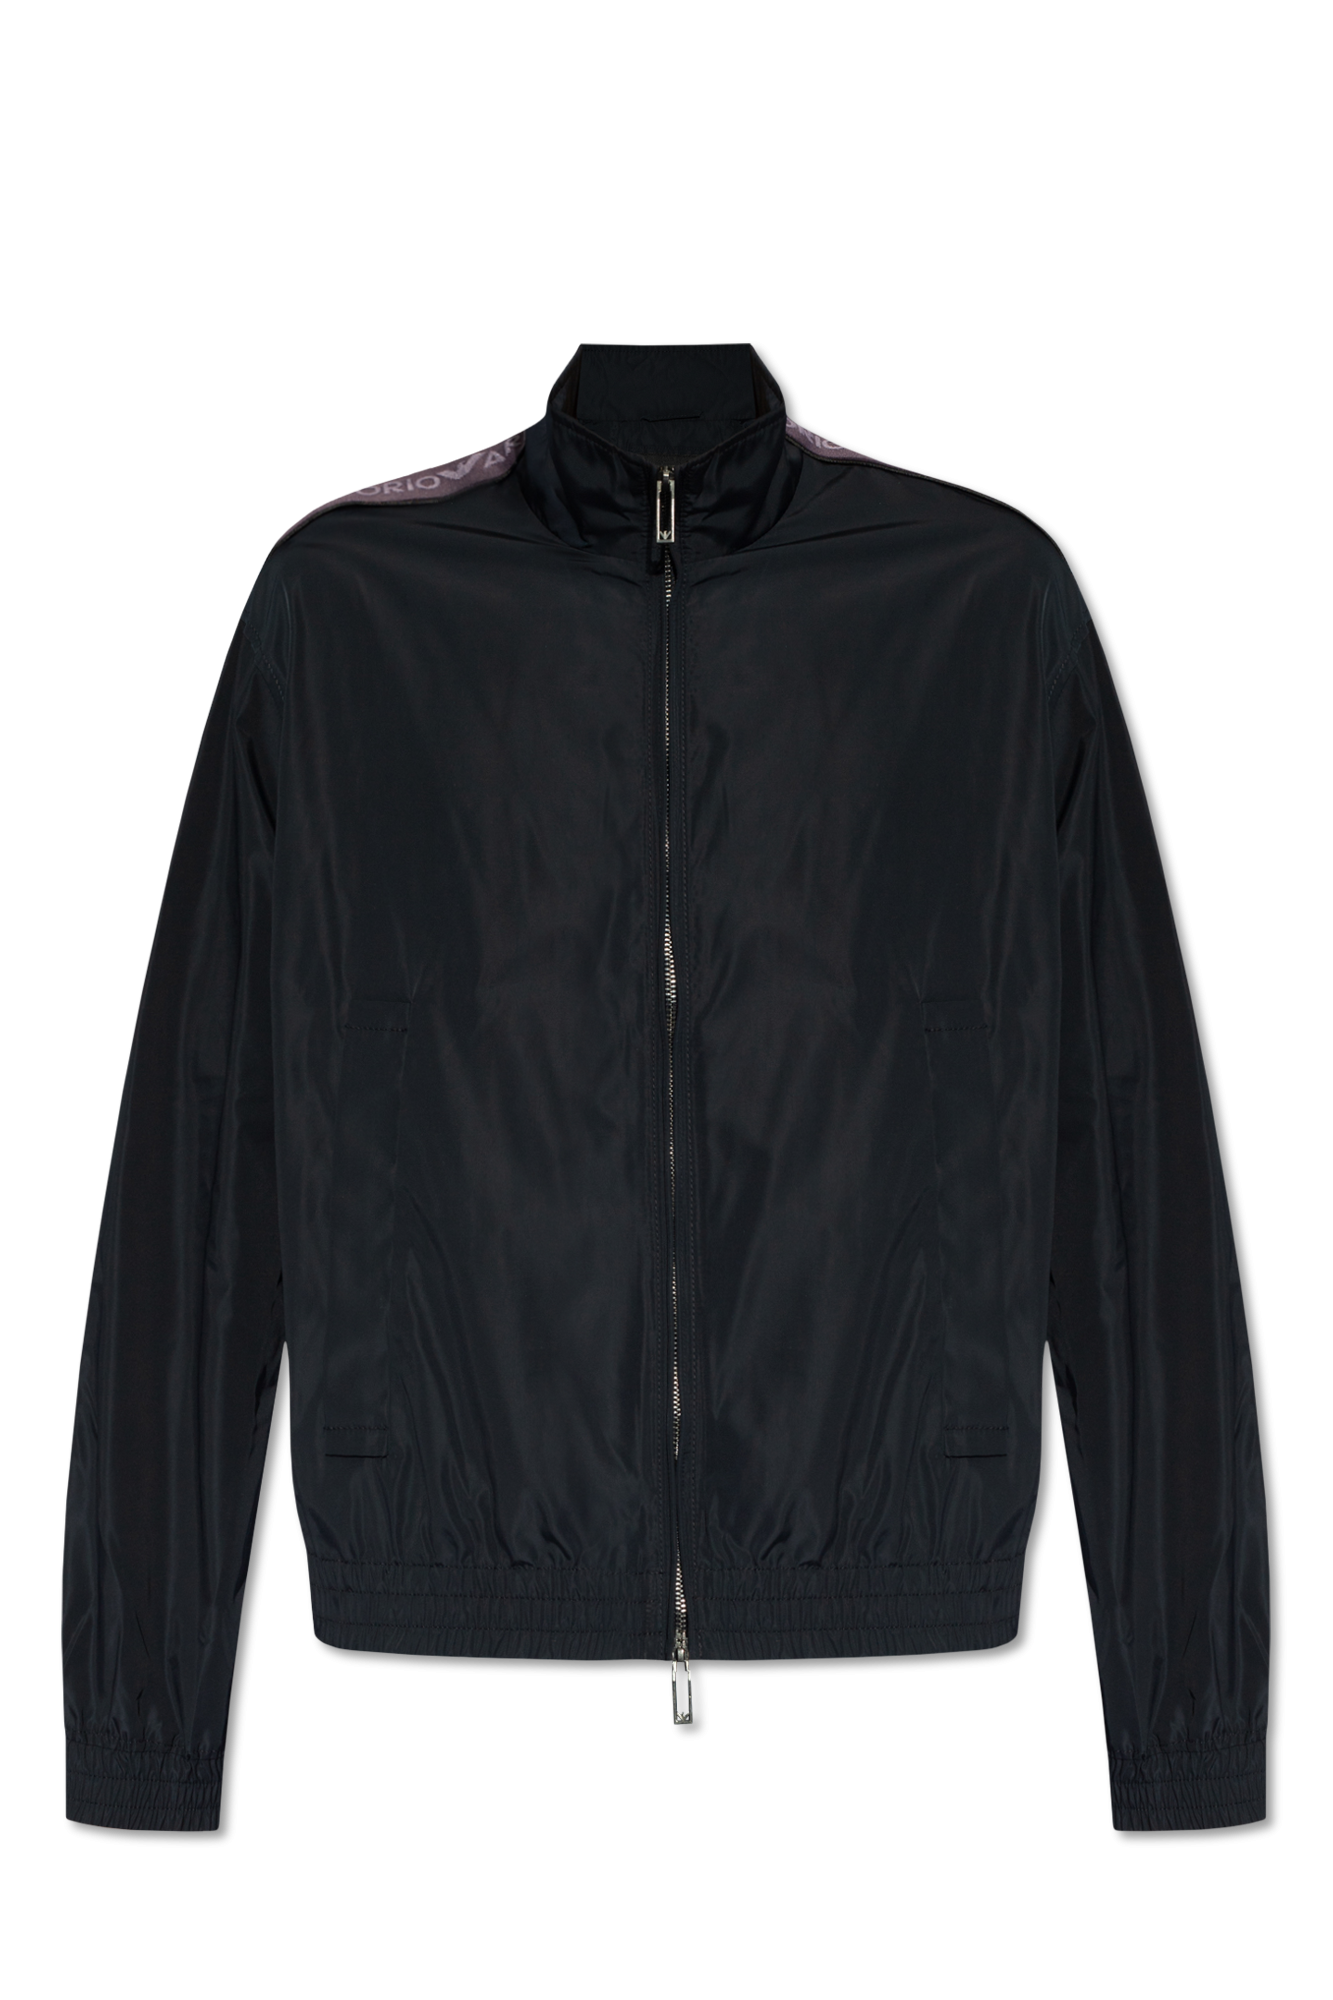 Emporio Armani Jacket with a stand-up collar | Men's Clothing | Vitkac